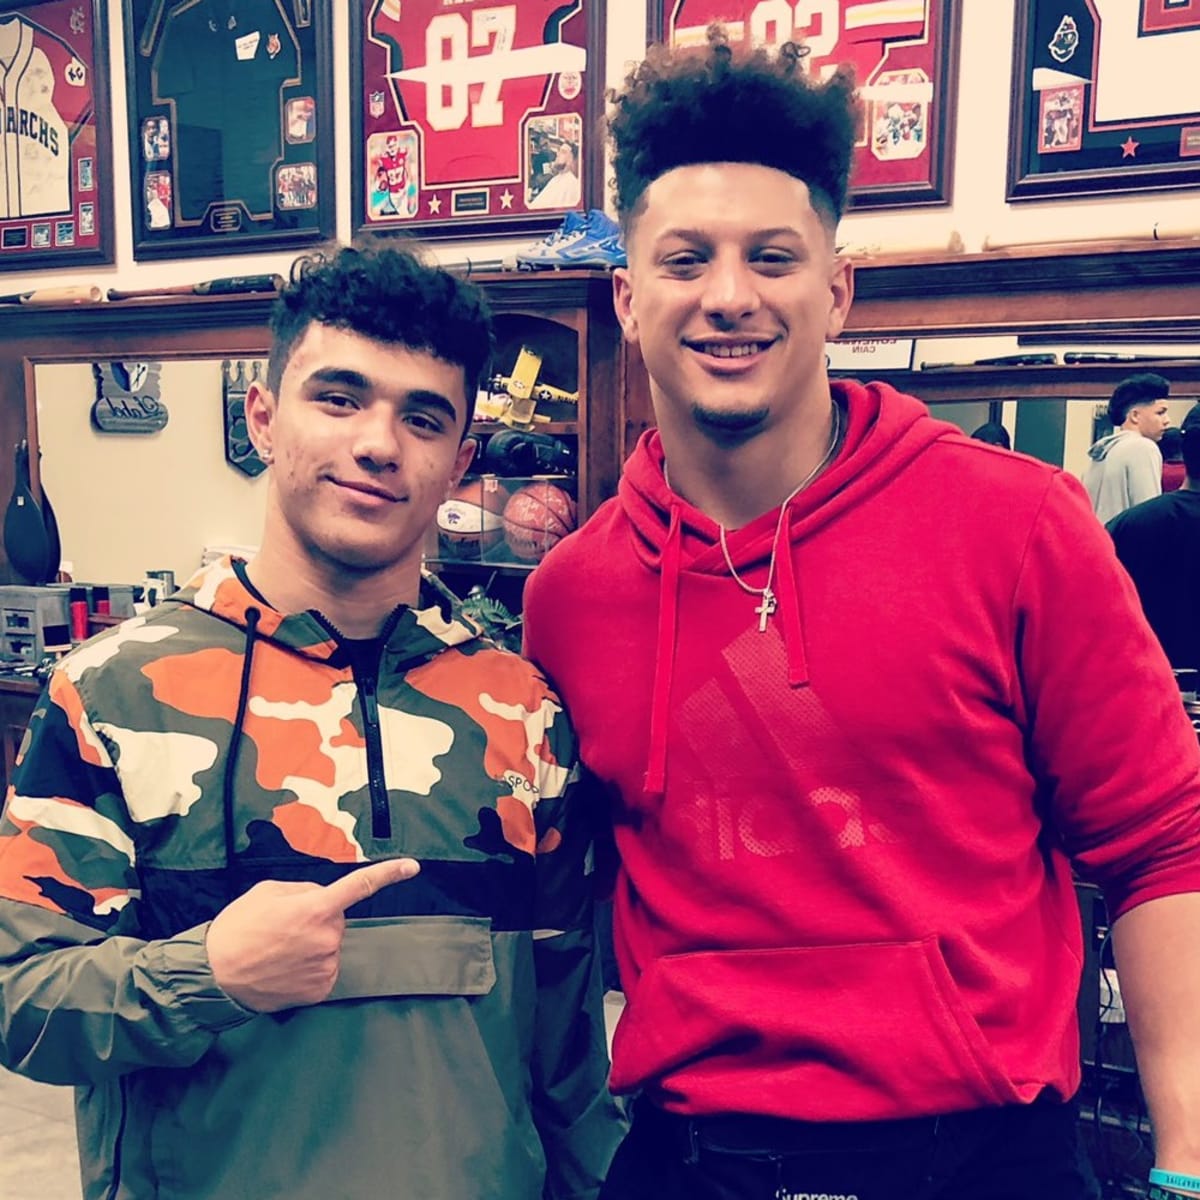 The Man Behind 'The Mahomes': Meet the QB's Barber - Sports Illustrated